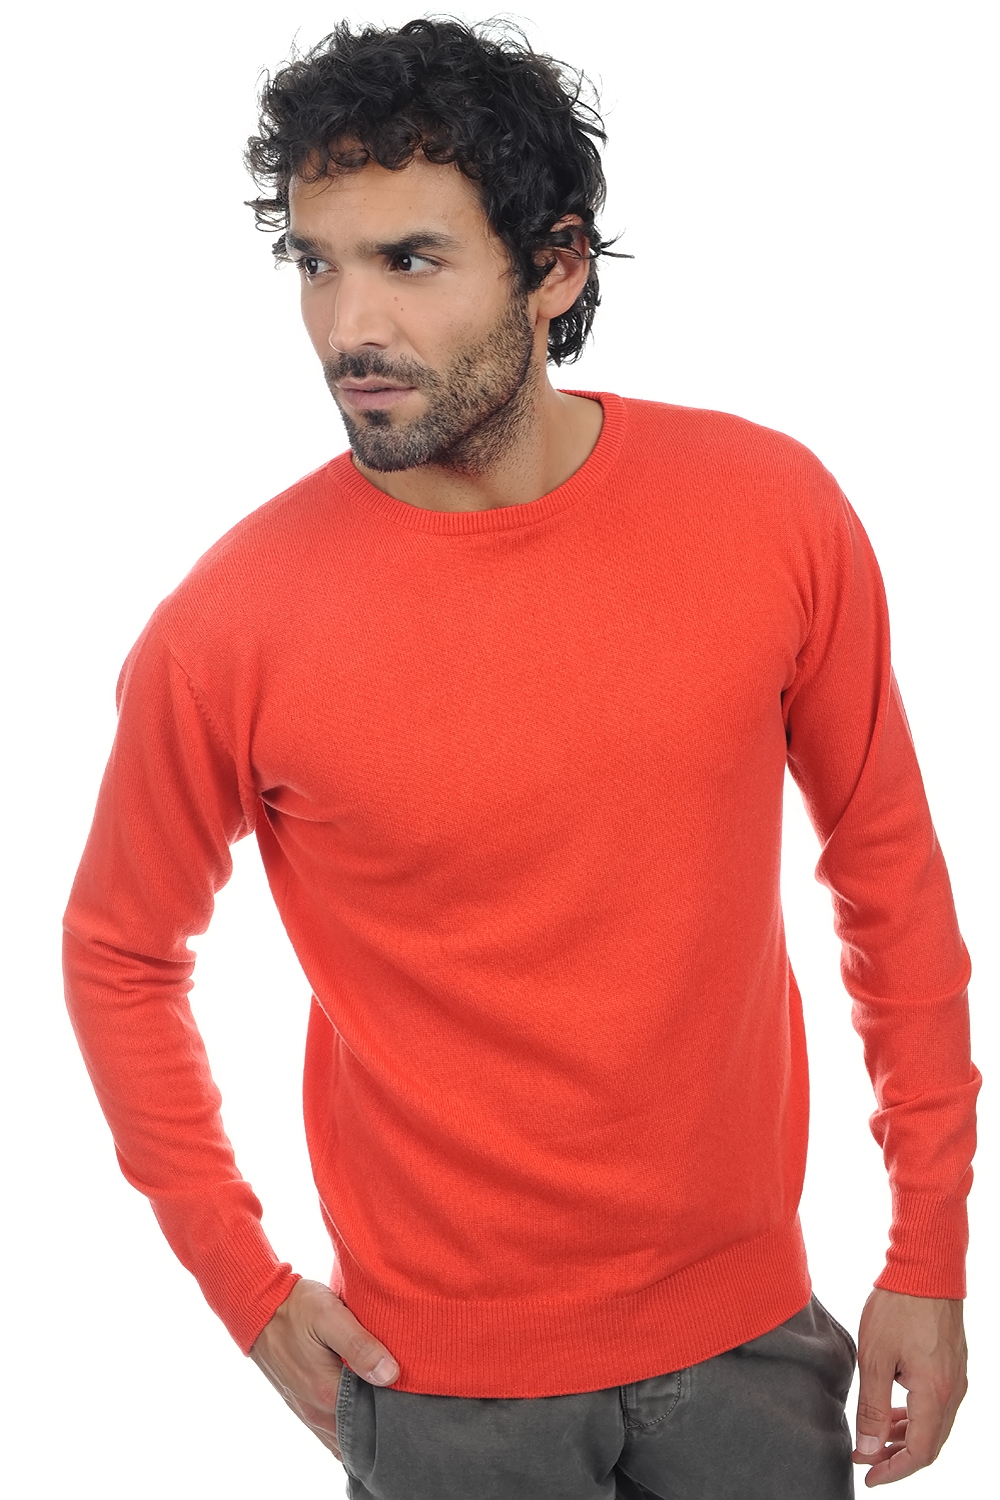 Cachemire pull homme col rond keaton corail lumineux 2xl